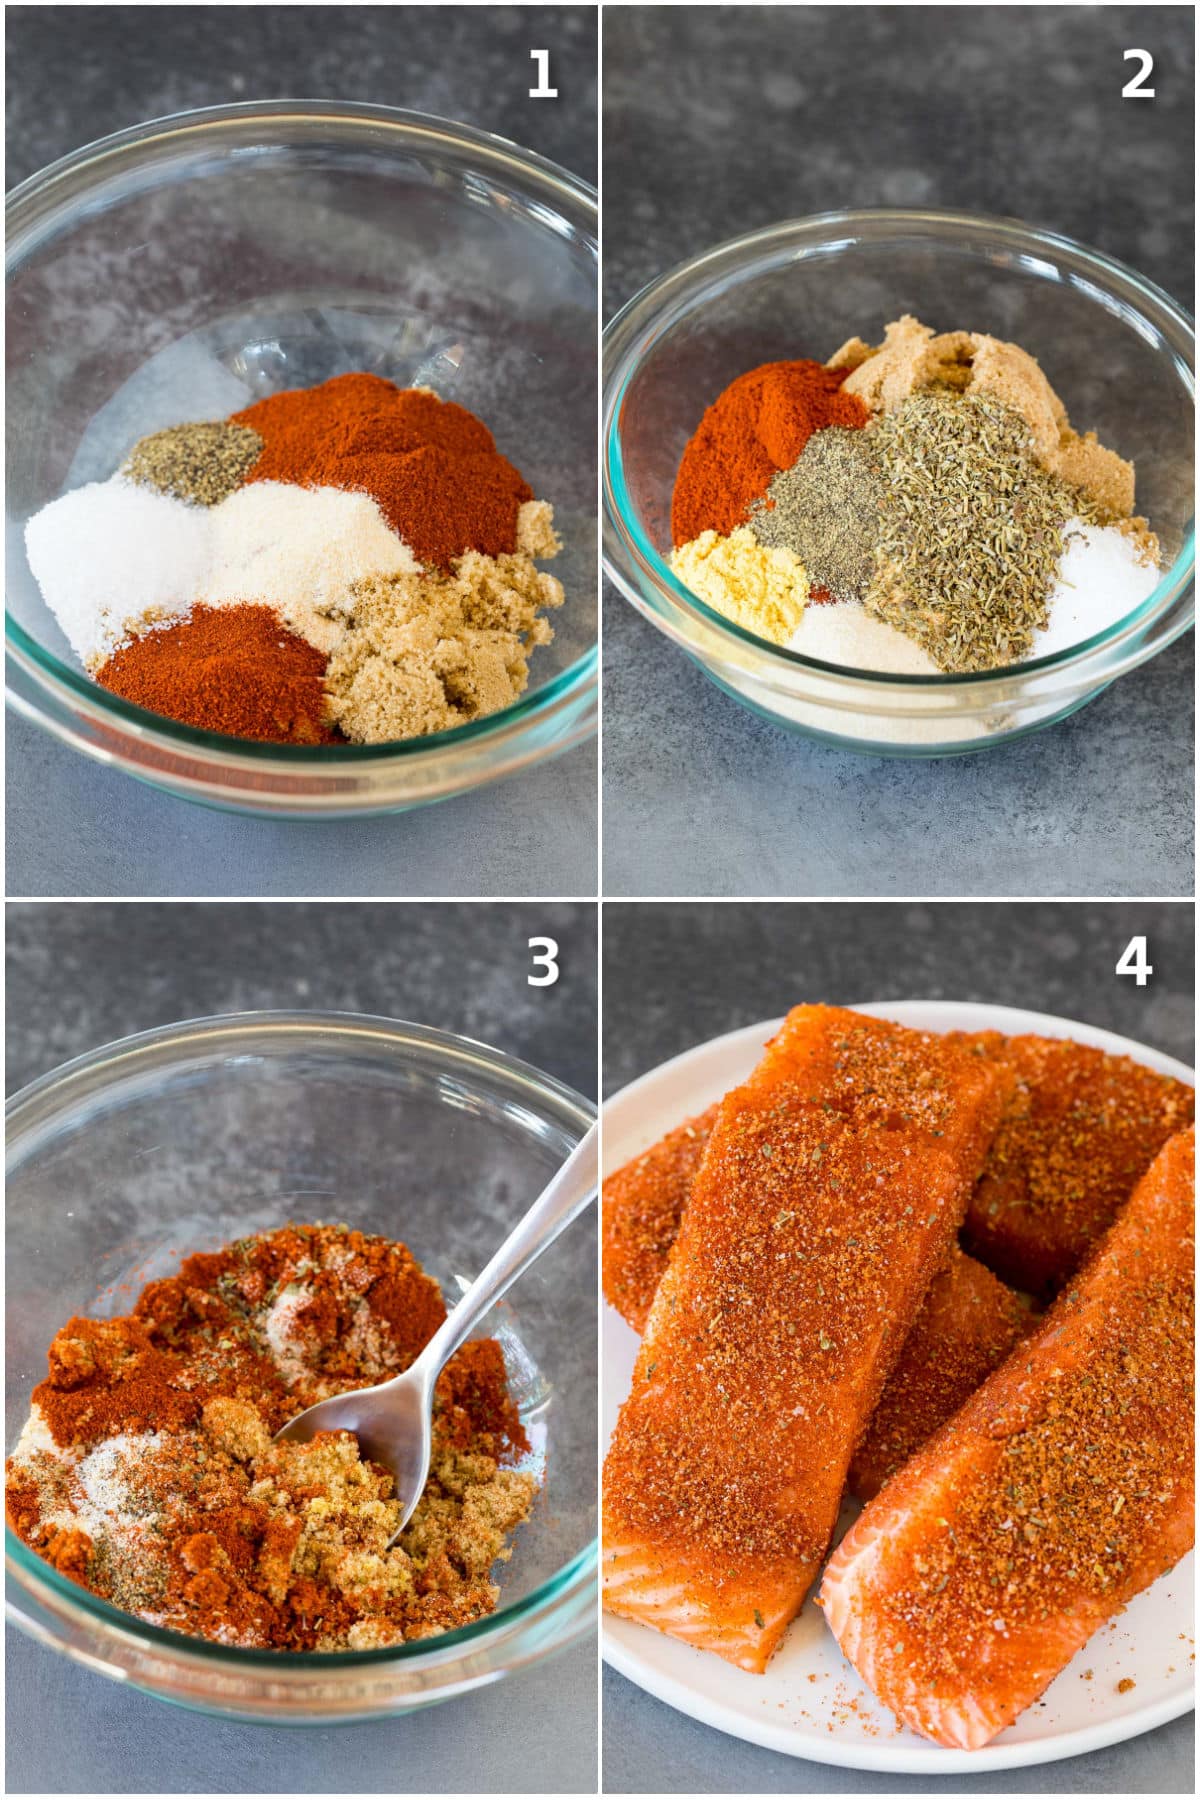 Step by step process shots showing how to make salmon seasoning.